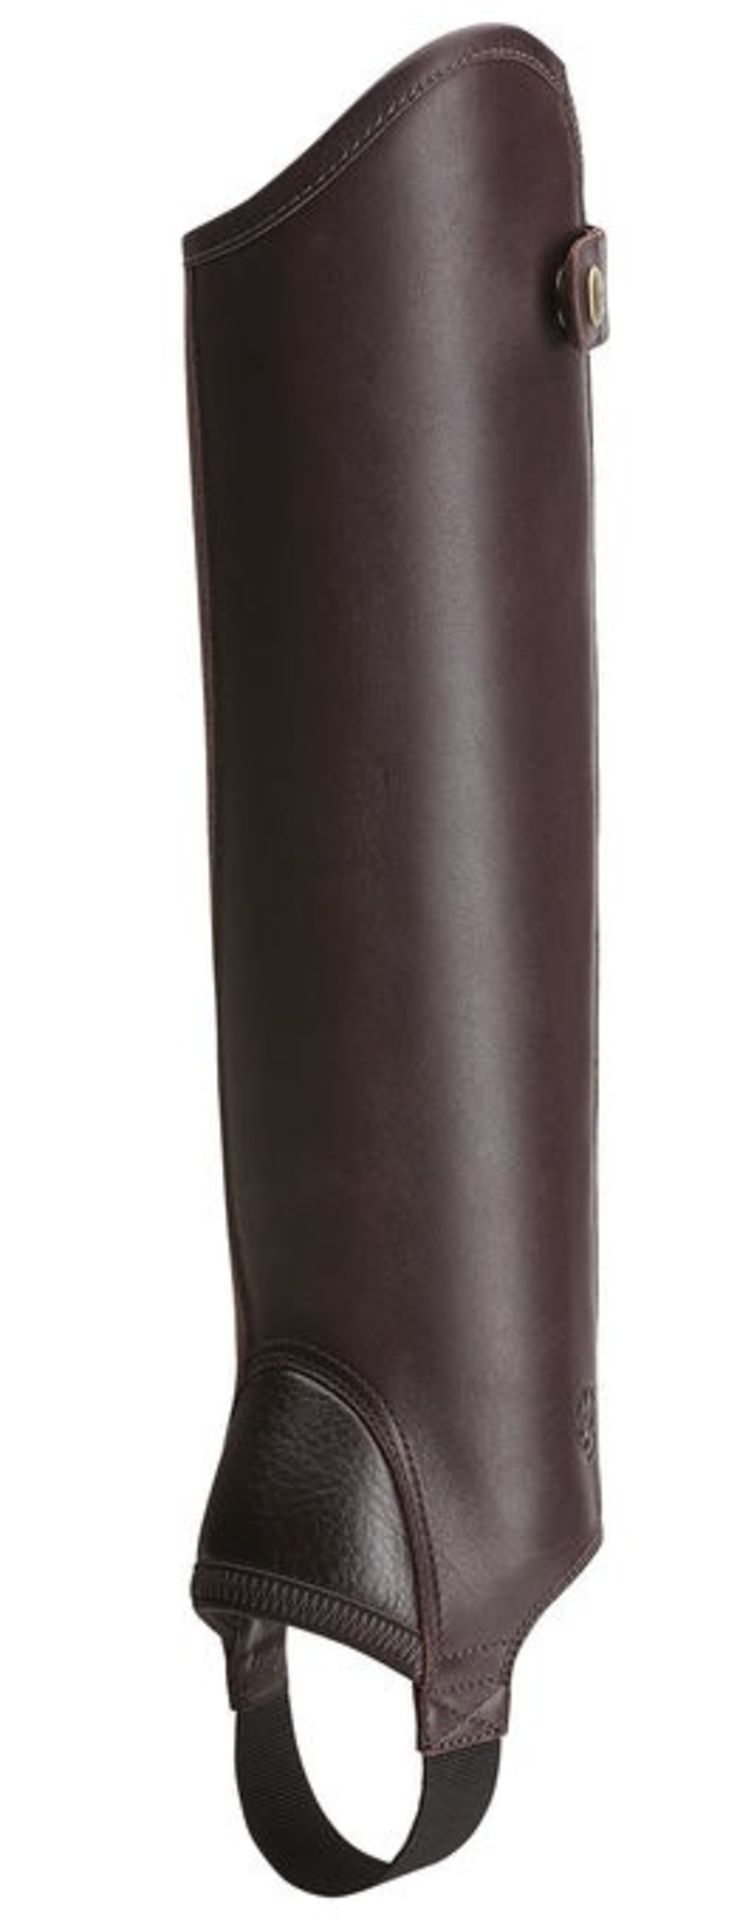 1 x Ariat Junior Concord Chaps - Colour Sienna - Style 10015409 - Height 16 Inch / Calf 12 1/2